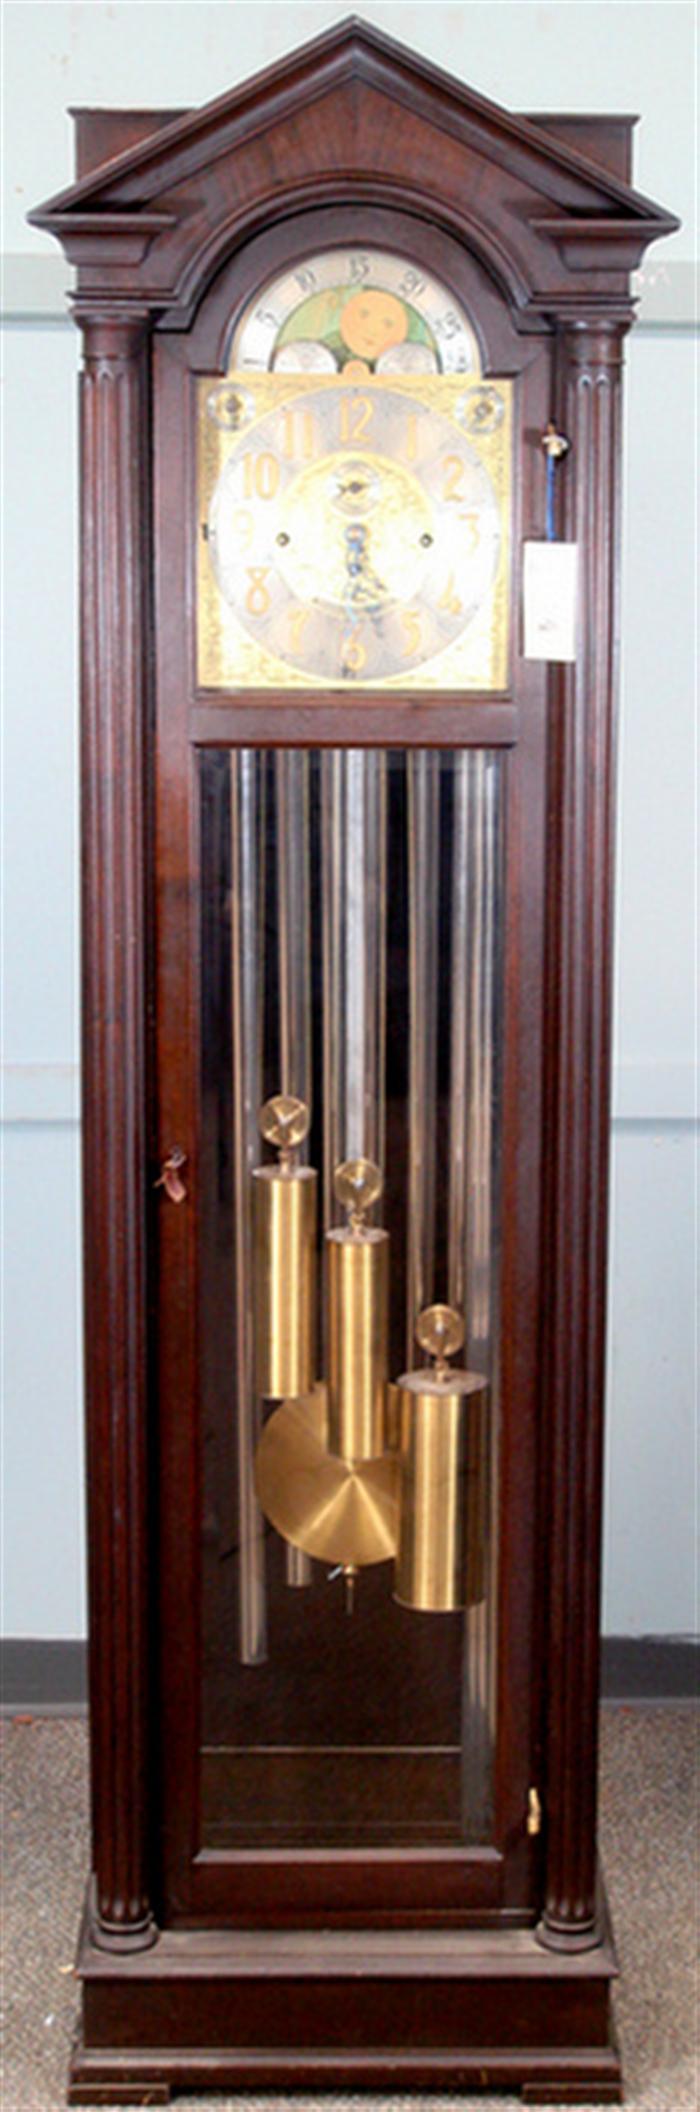 7 tube chiming hall clock by Colonial 3c209